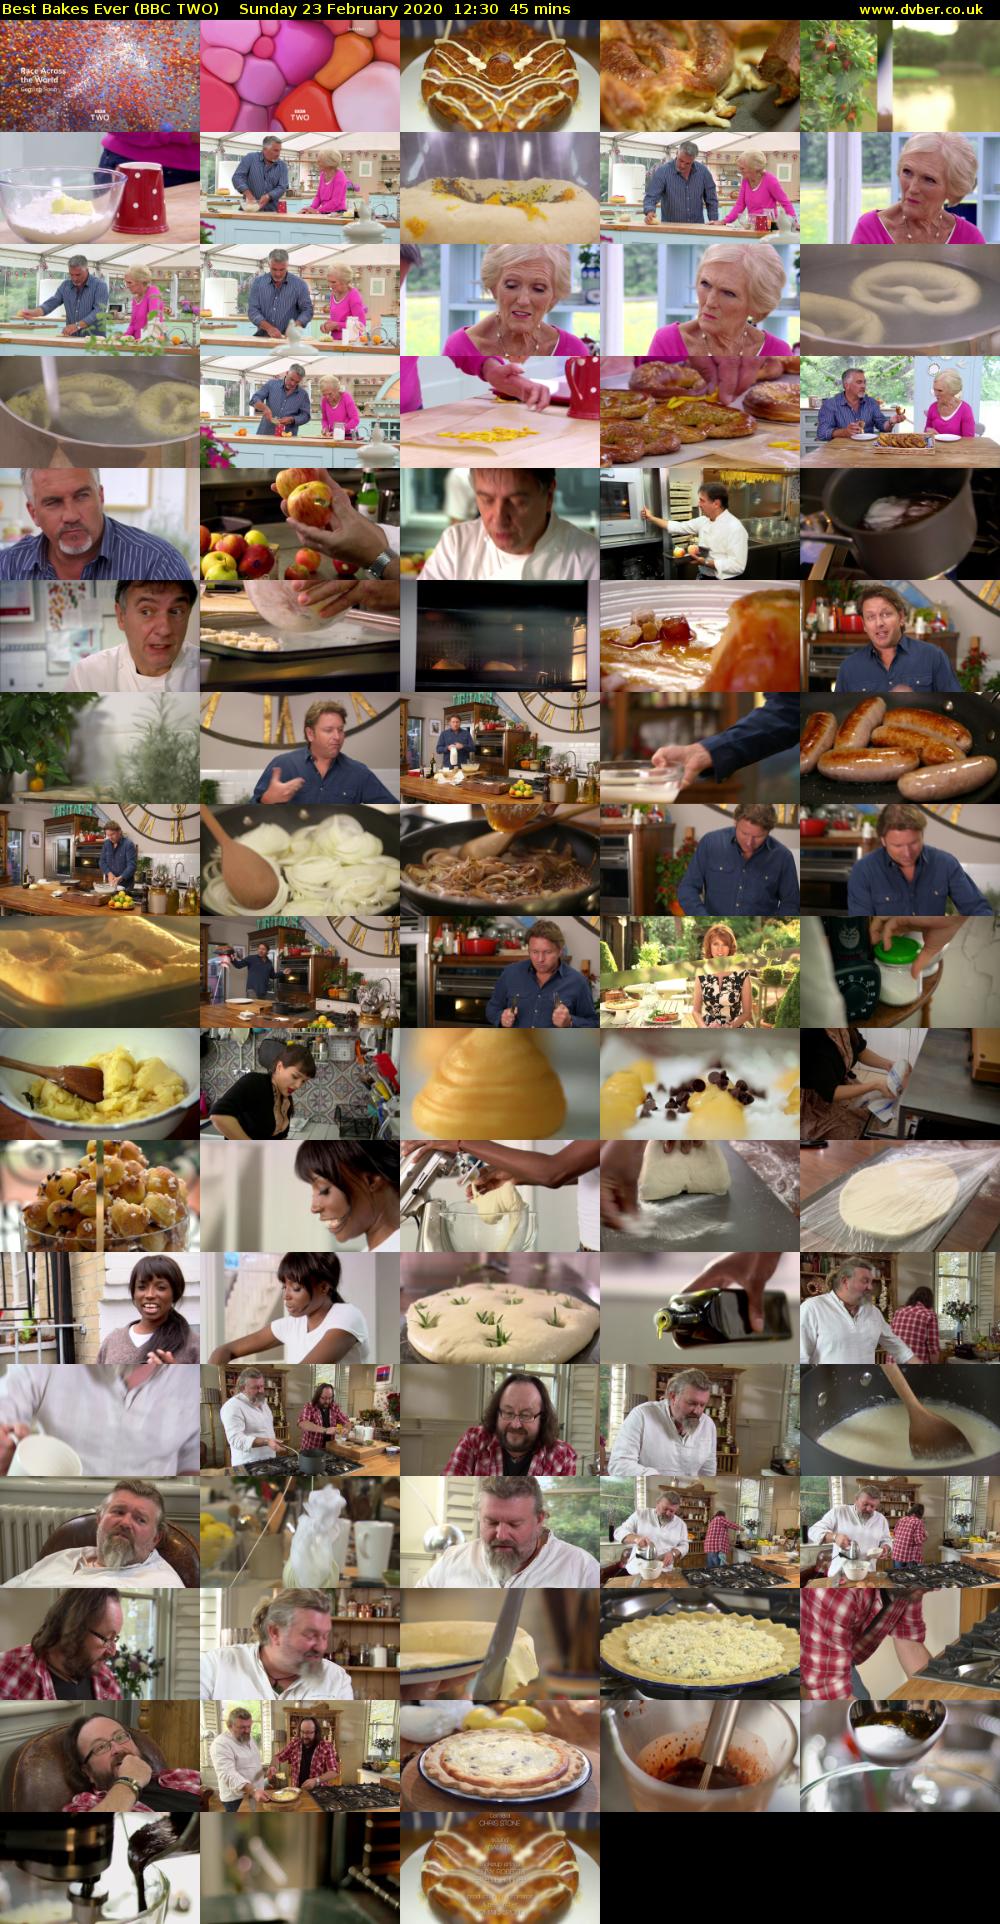 Best Bakes Ever (BBC TWO) Sunday 23 February 2020 12:30 - 13:15